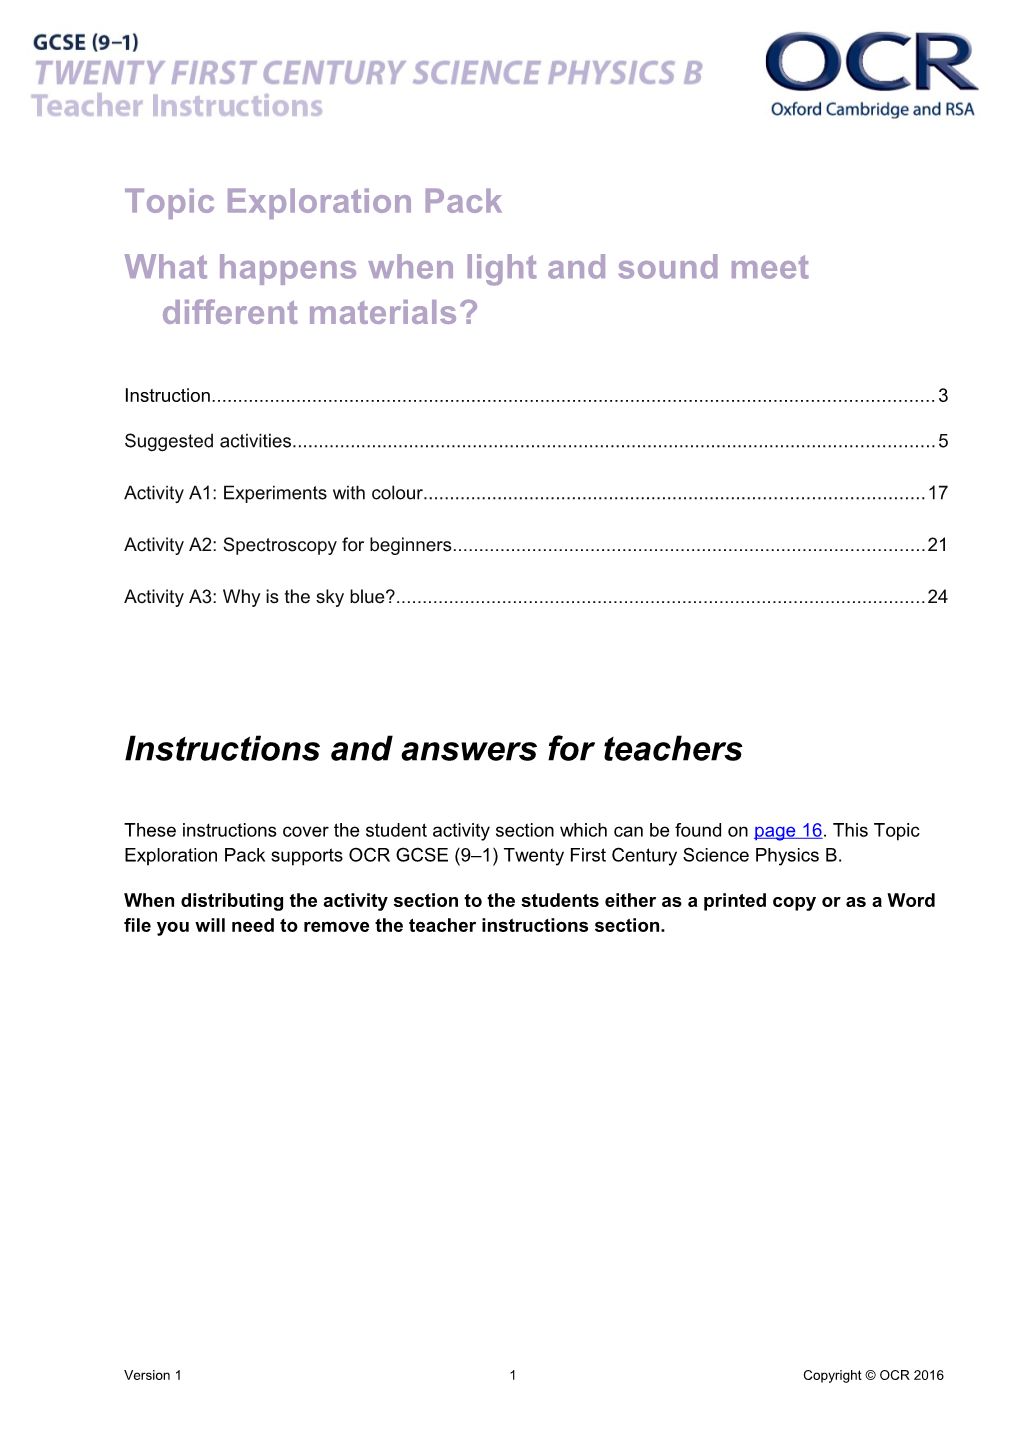 OCR GCSE Twenty First Century Science Physics B Topic Exploration Pack What Happens When